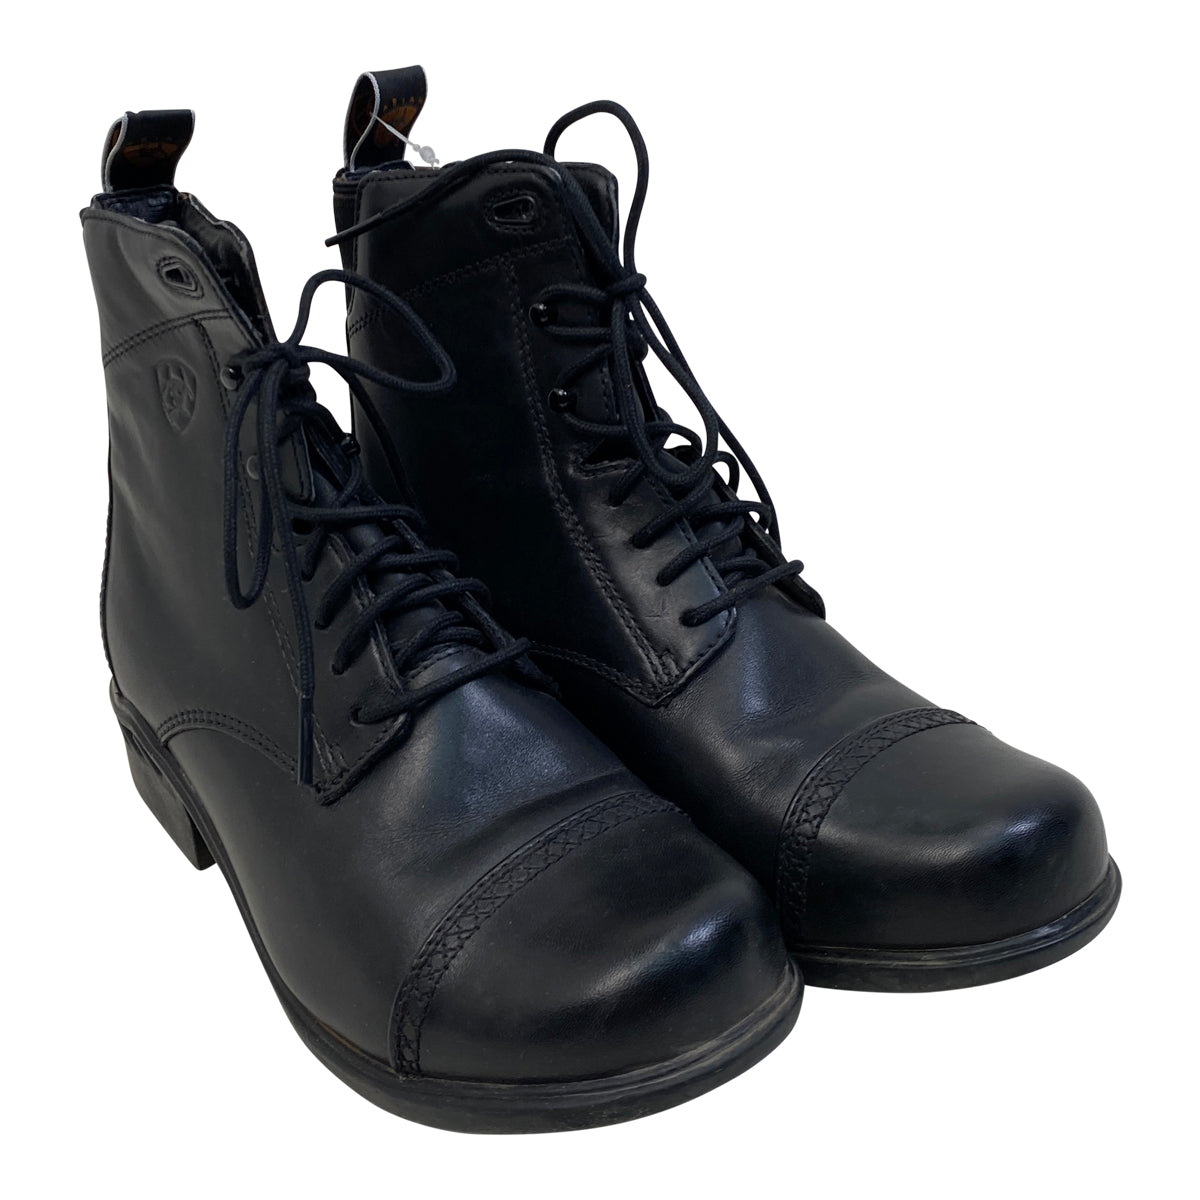 Ariat Heritage RT Paddock Boots in Black